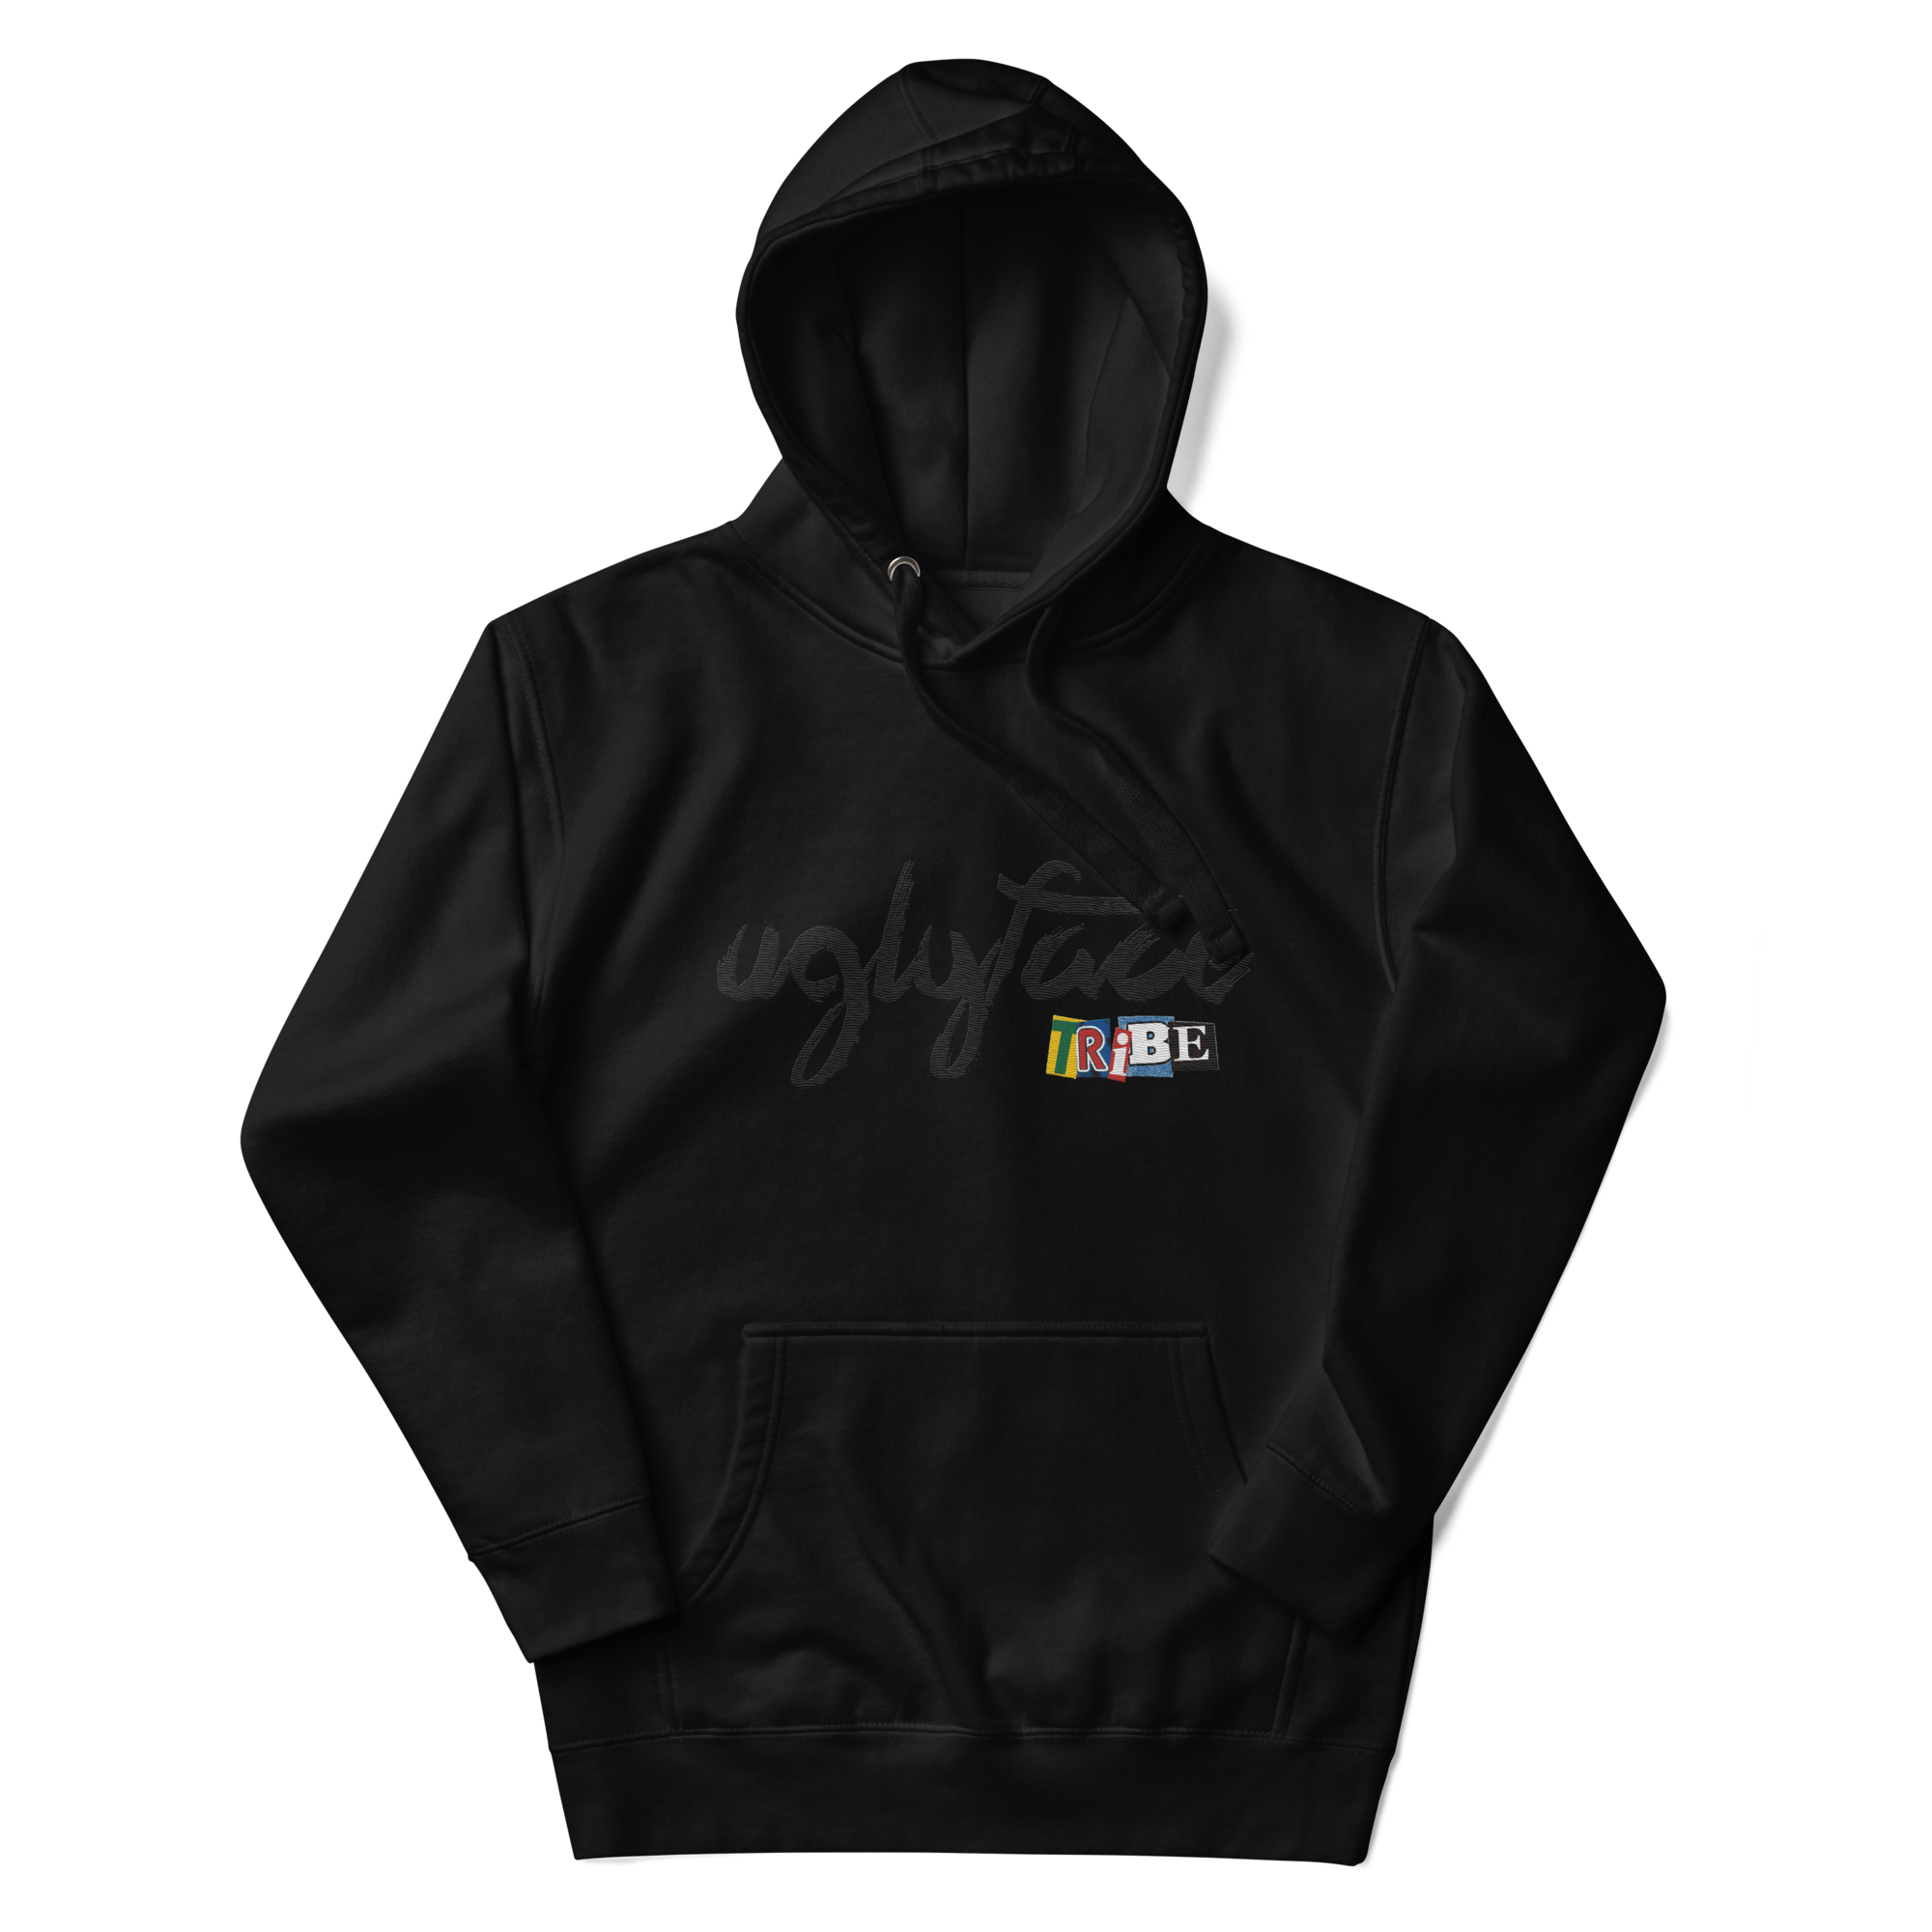 UGLYFACE TRiBE HOODIE BLACKED OUT